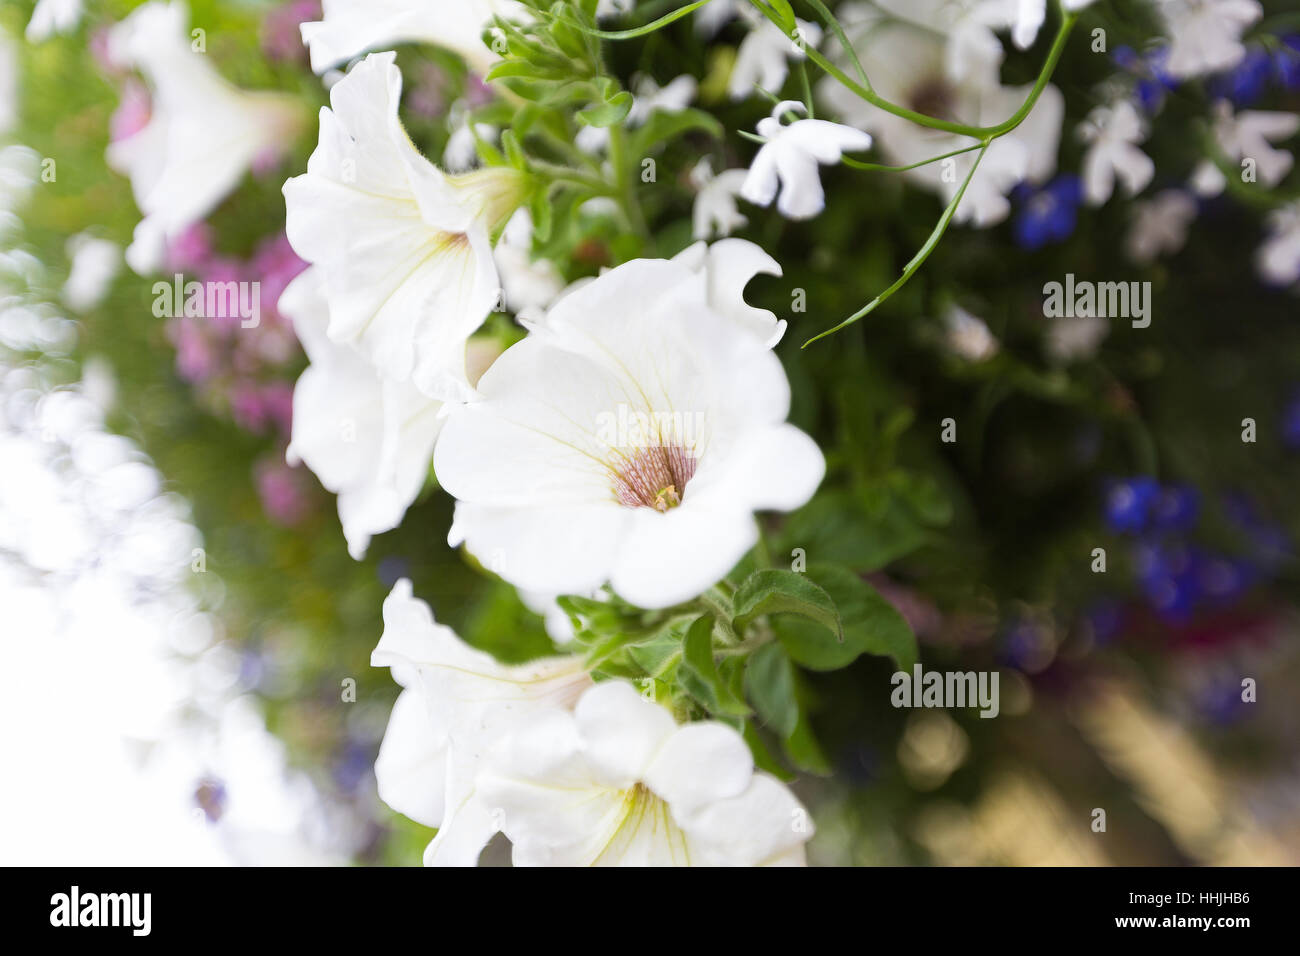 White and purple trumpet flowers in hanging basket with forget-me-nots Stock Photo